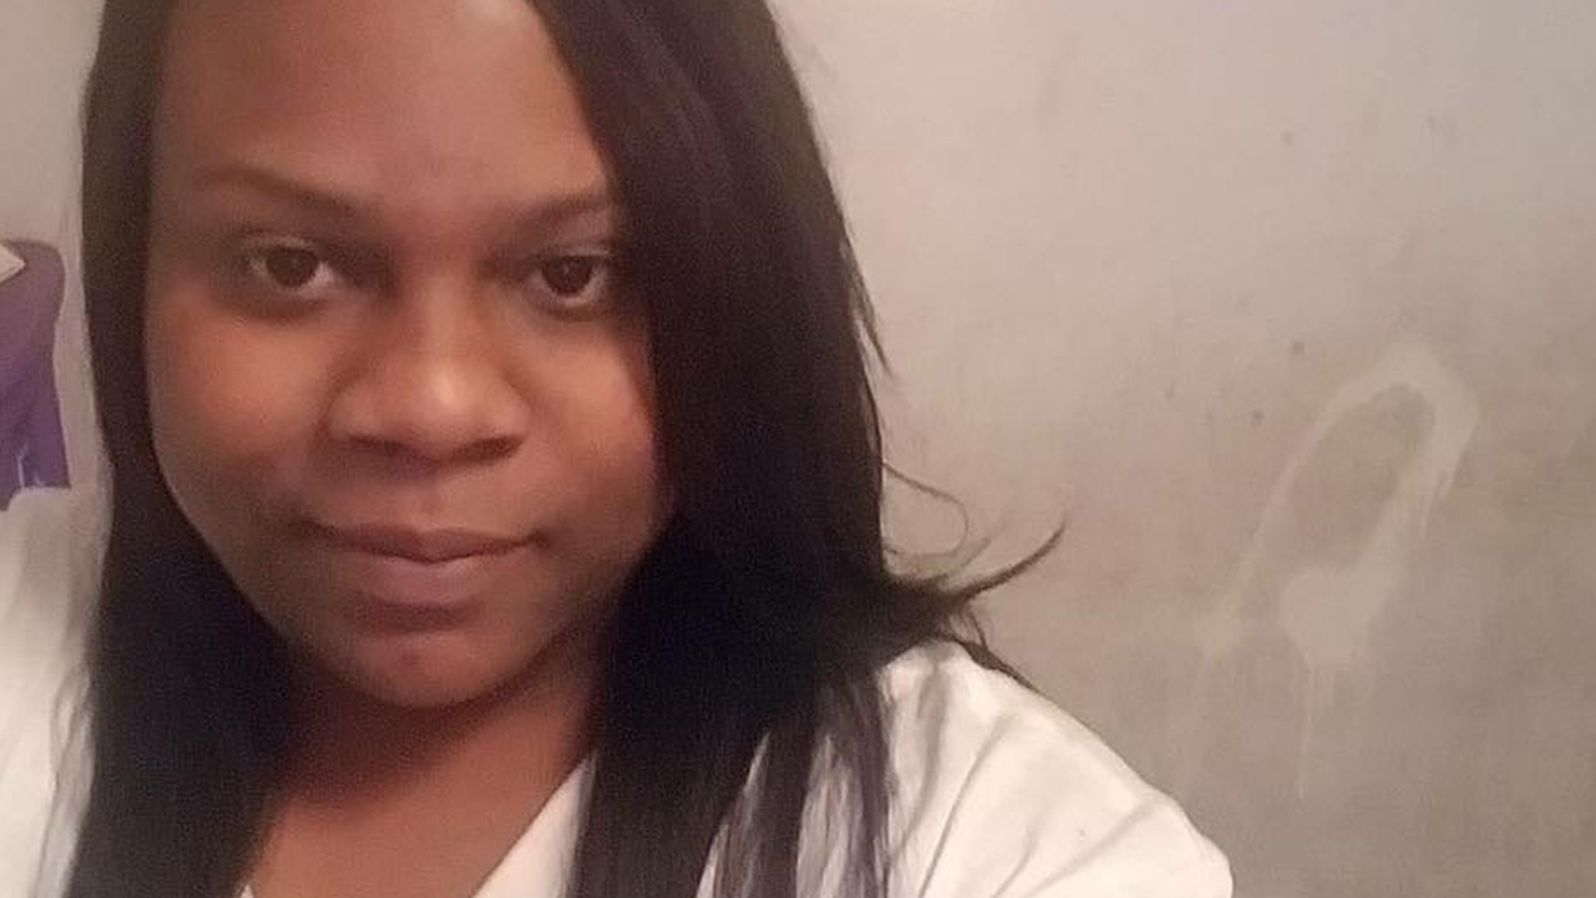 Tydi Dansbury, 37, was shot and killed in Baltimore in November, according to HRC. The local community held a vigil in her honor. Her case remains open.